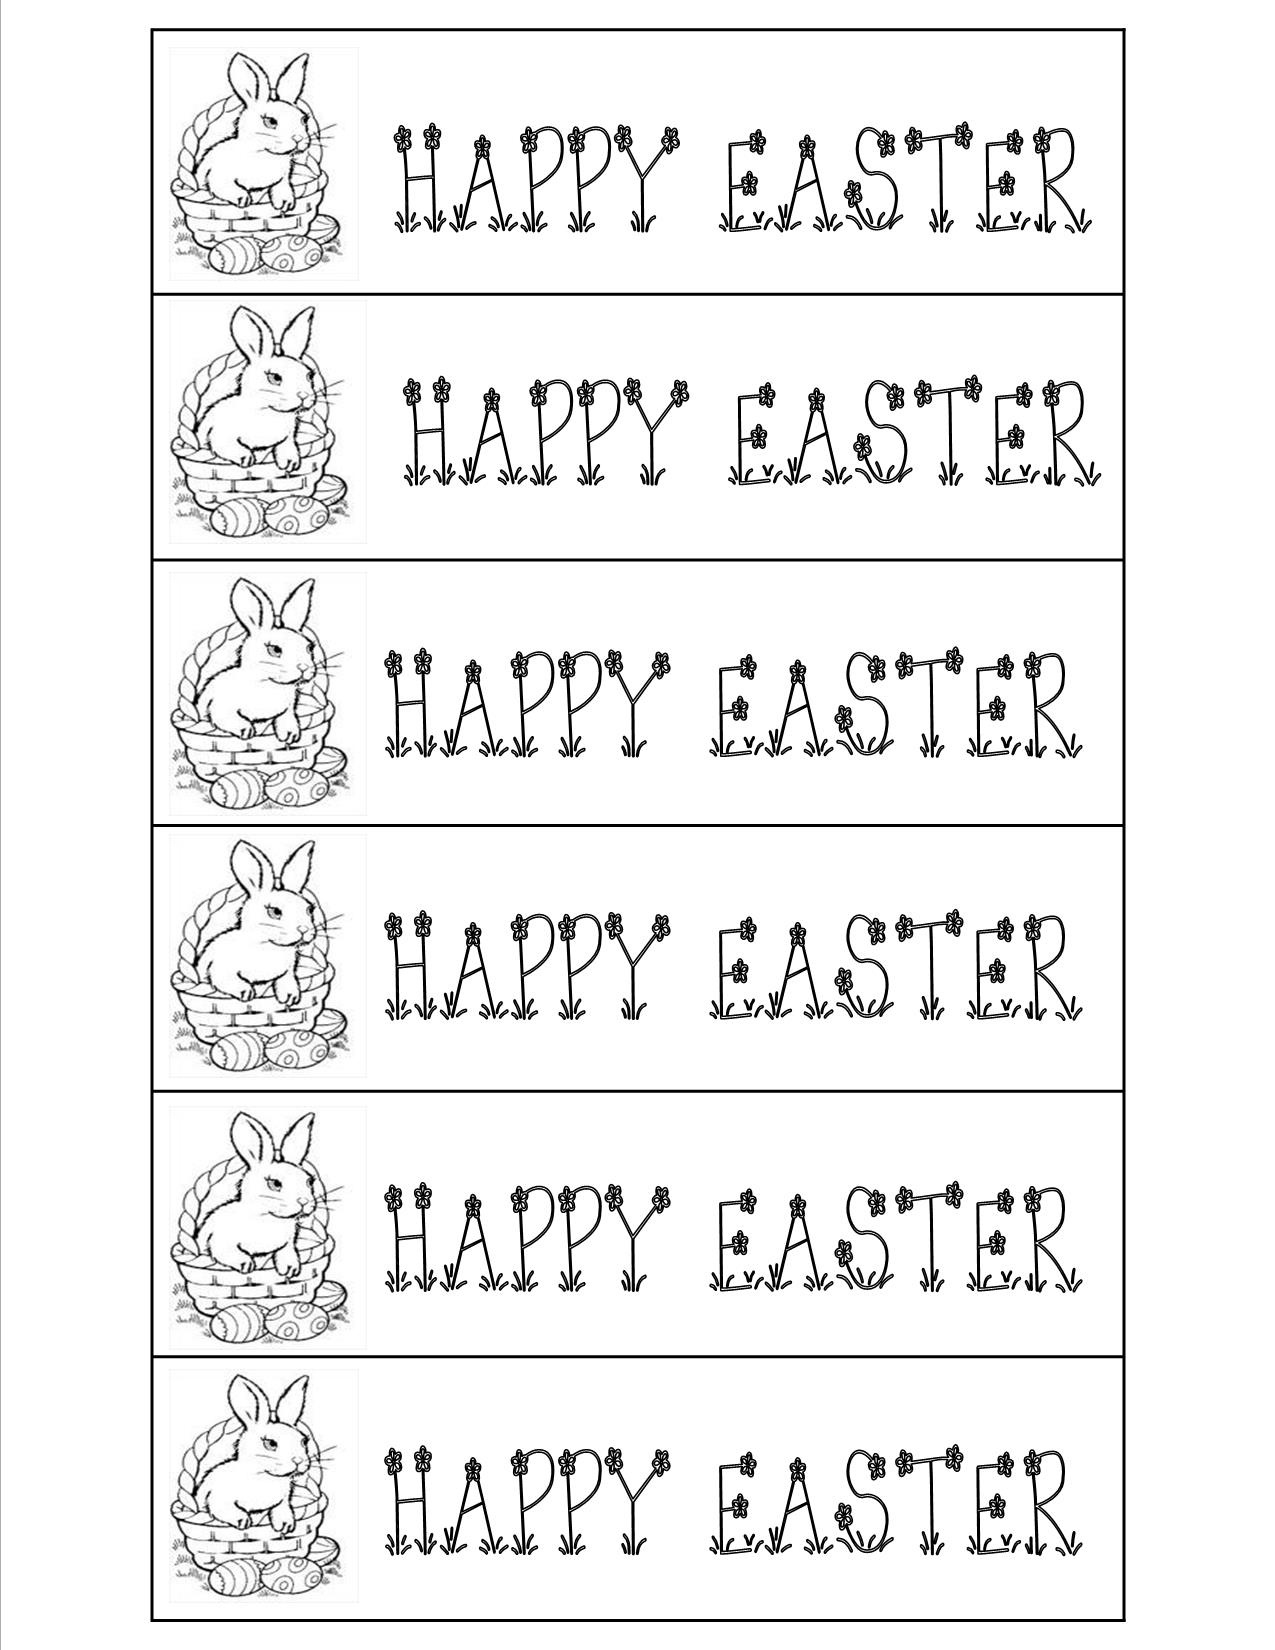 Free Printable Easter Bookmarks – Happy Easter &amp;amp; Thanksgiving 2018 - Free Printable Religious Easter Bookmarks